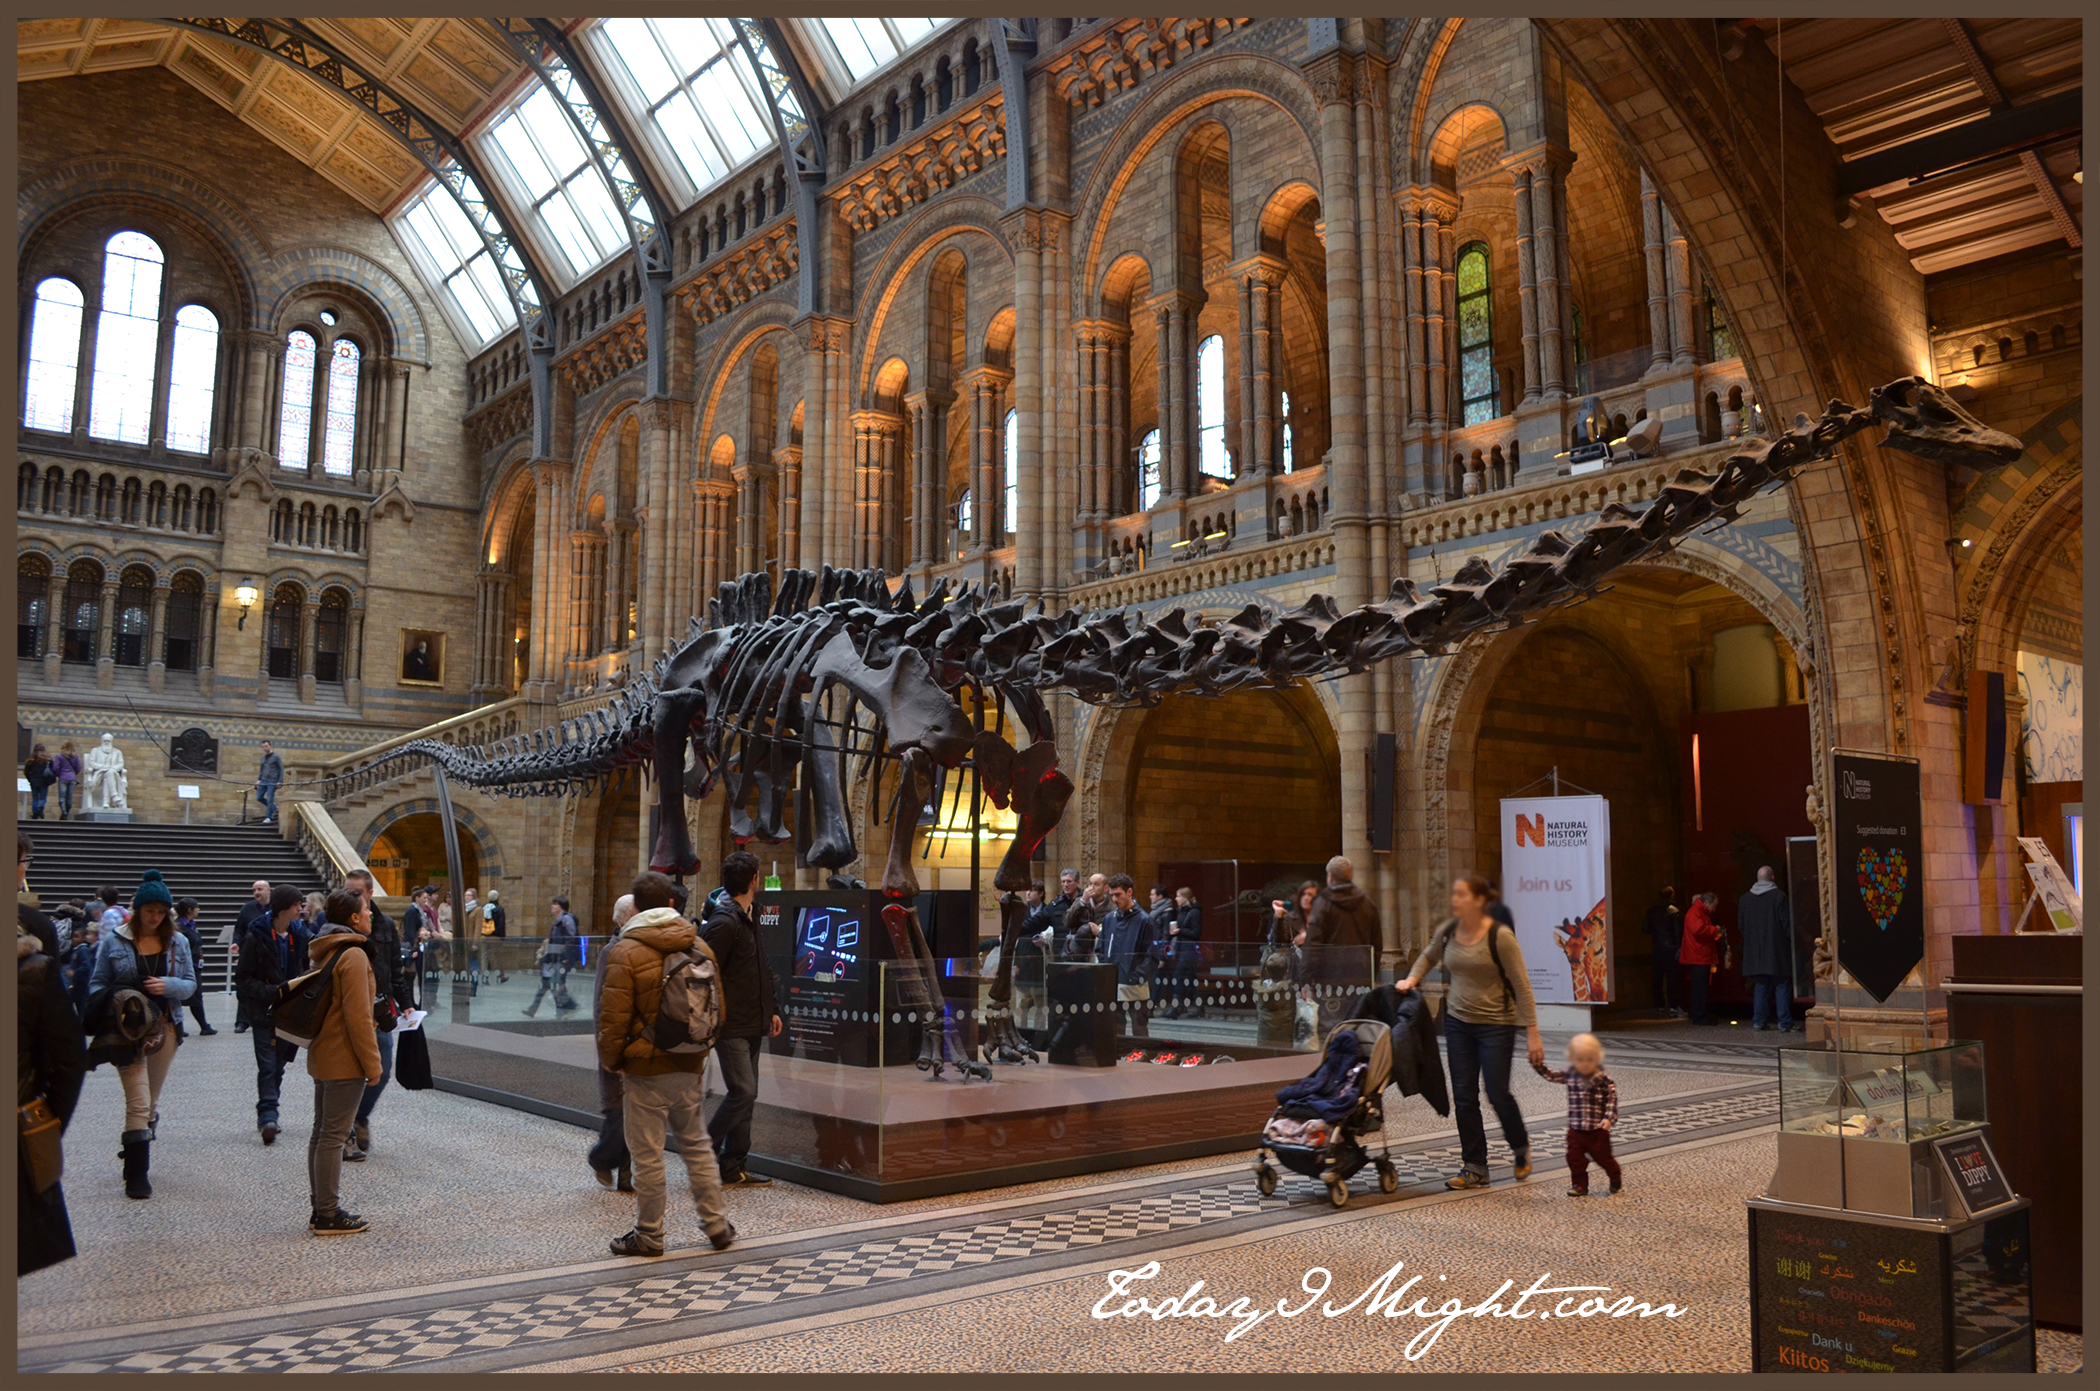 London's Natural History Museum - Today I Might...